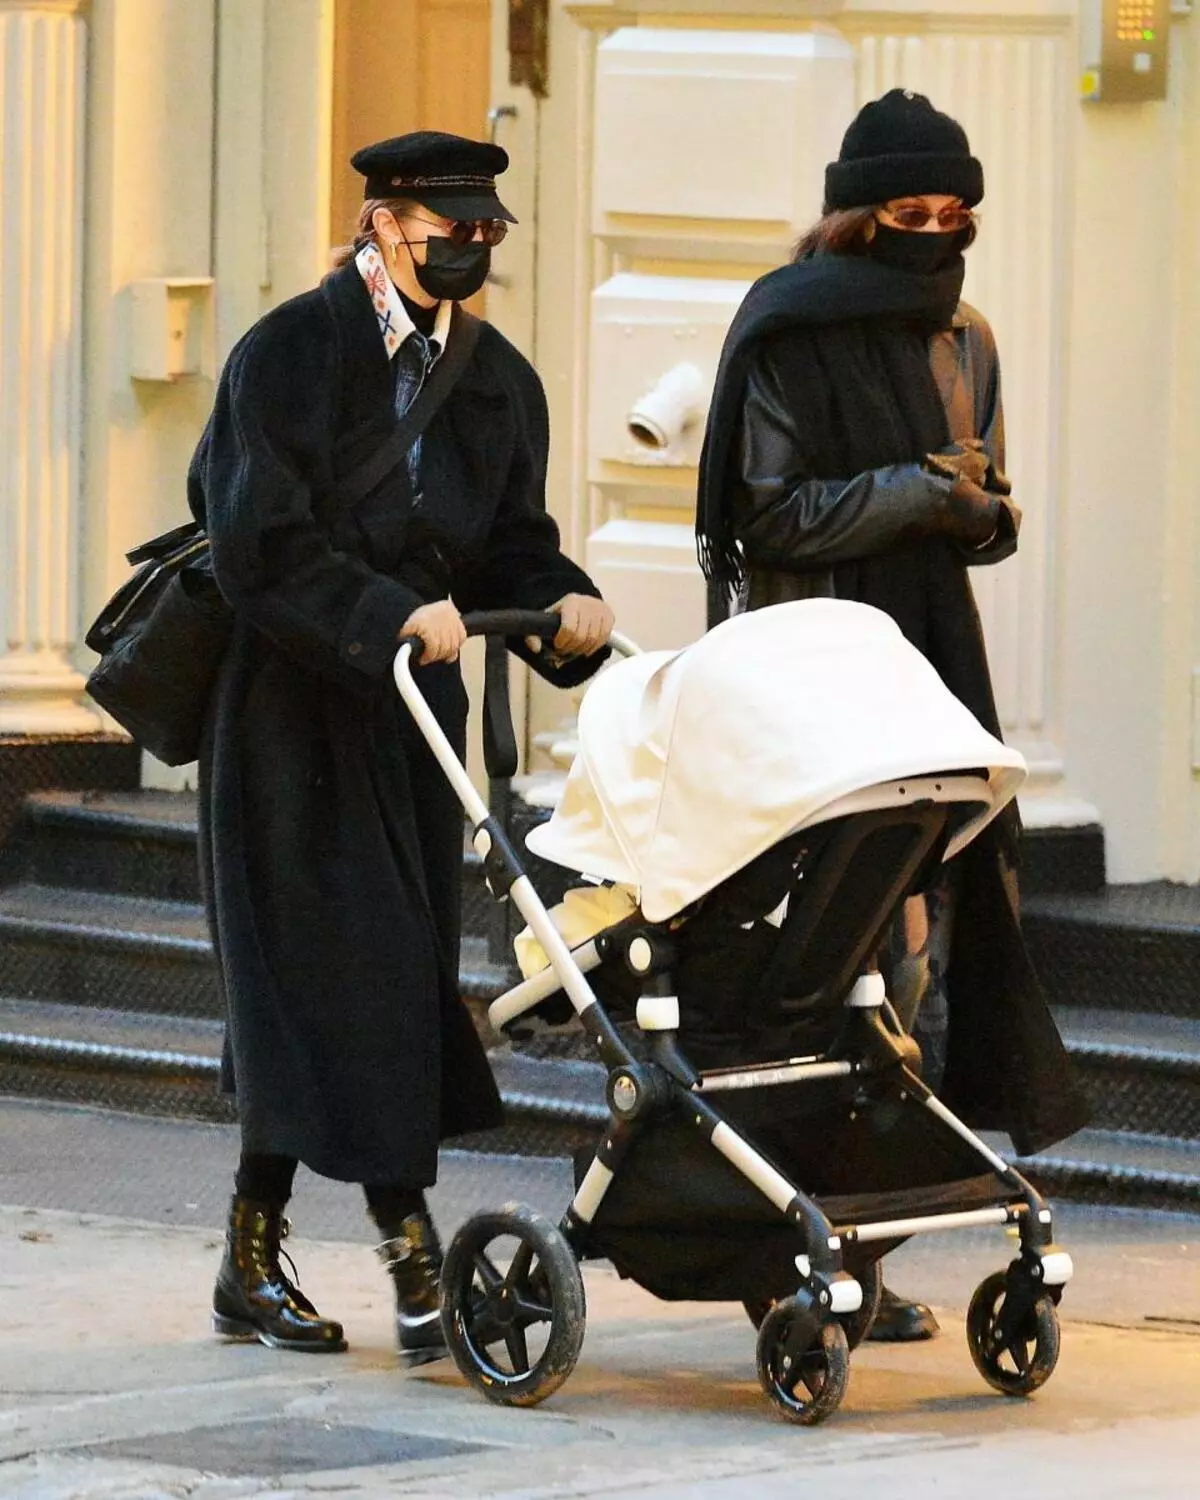 The disguise did not help: Jiji Hadid first captured for a walk with his daughter and Bella's sister 122634_2